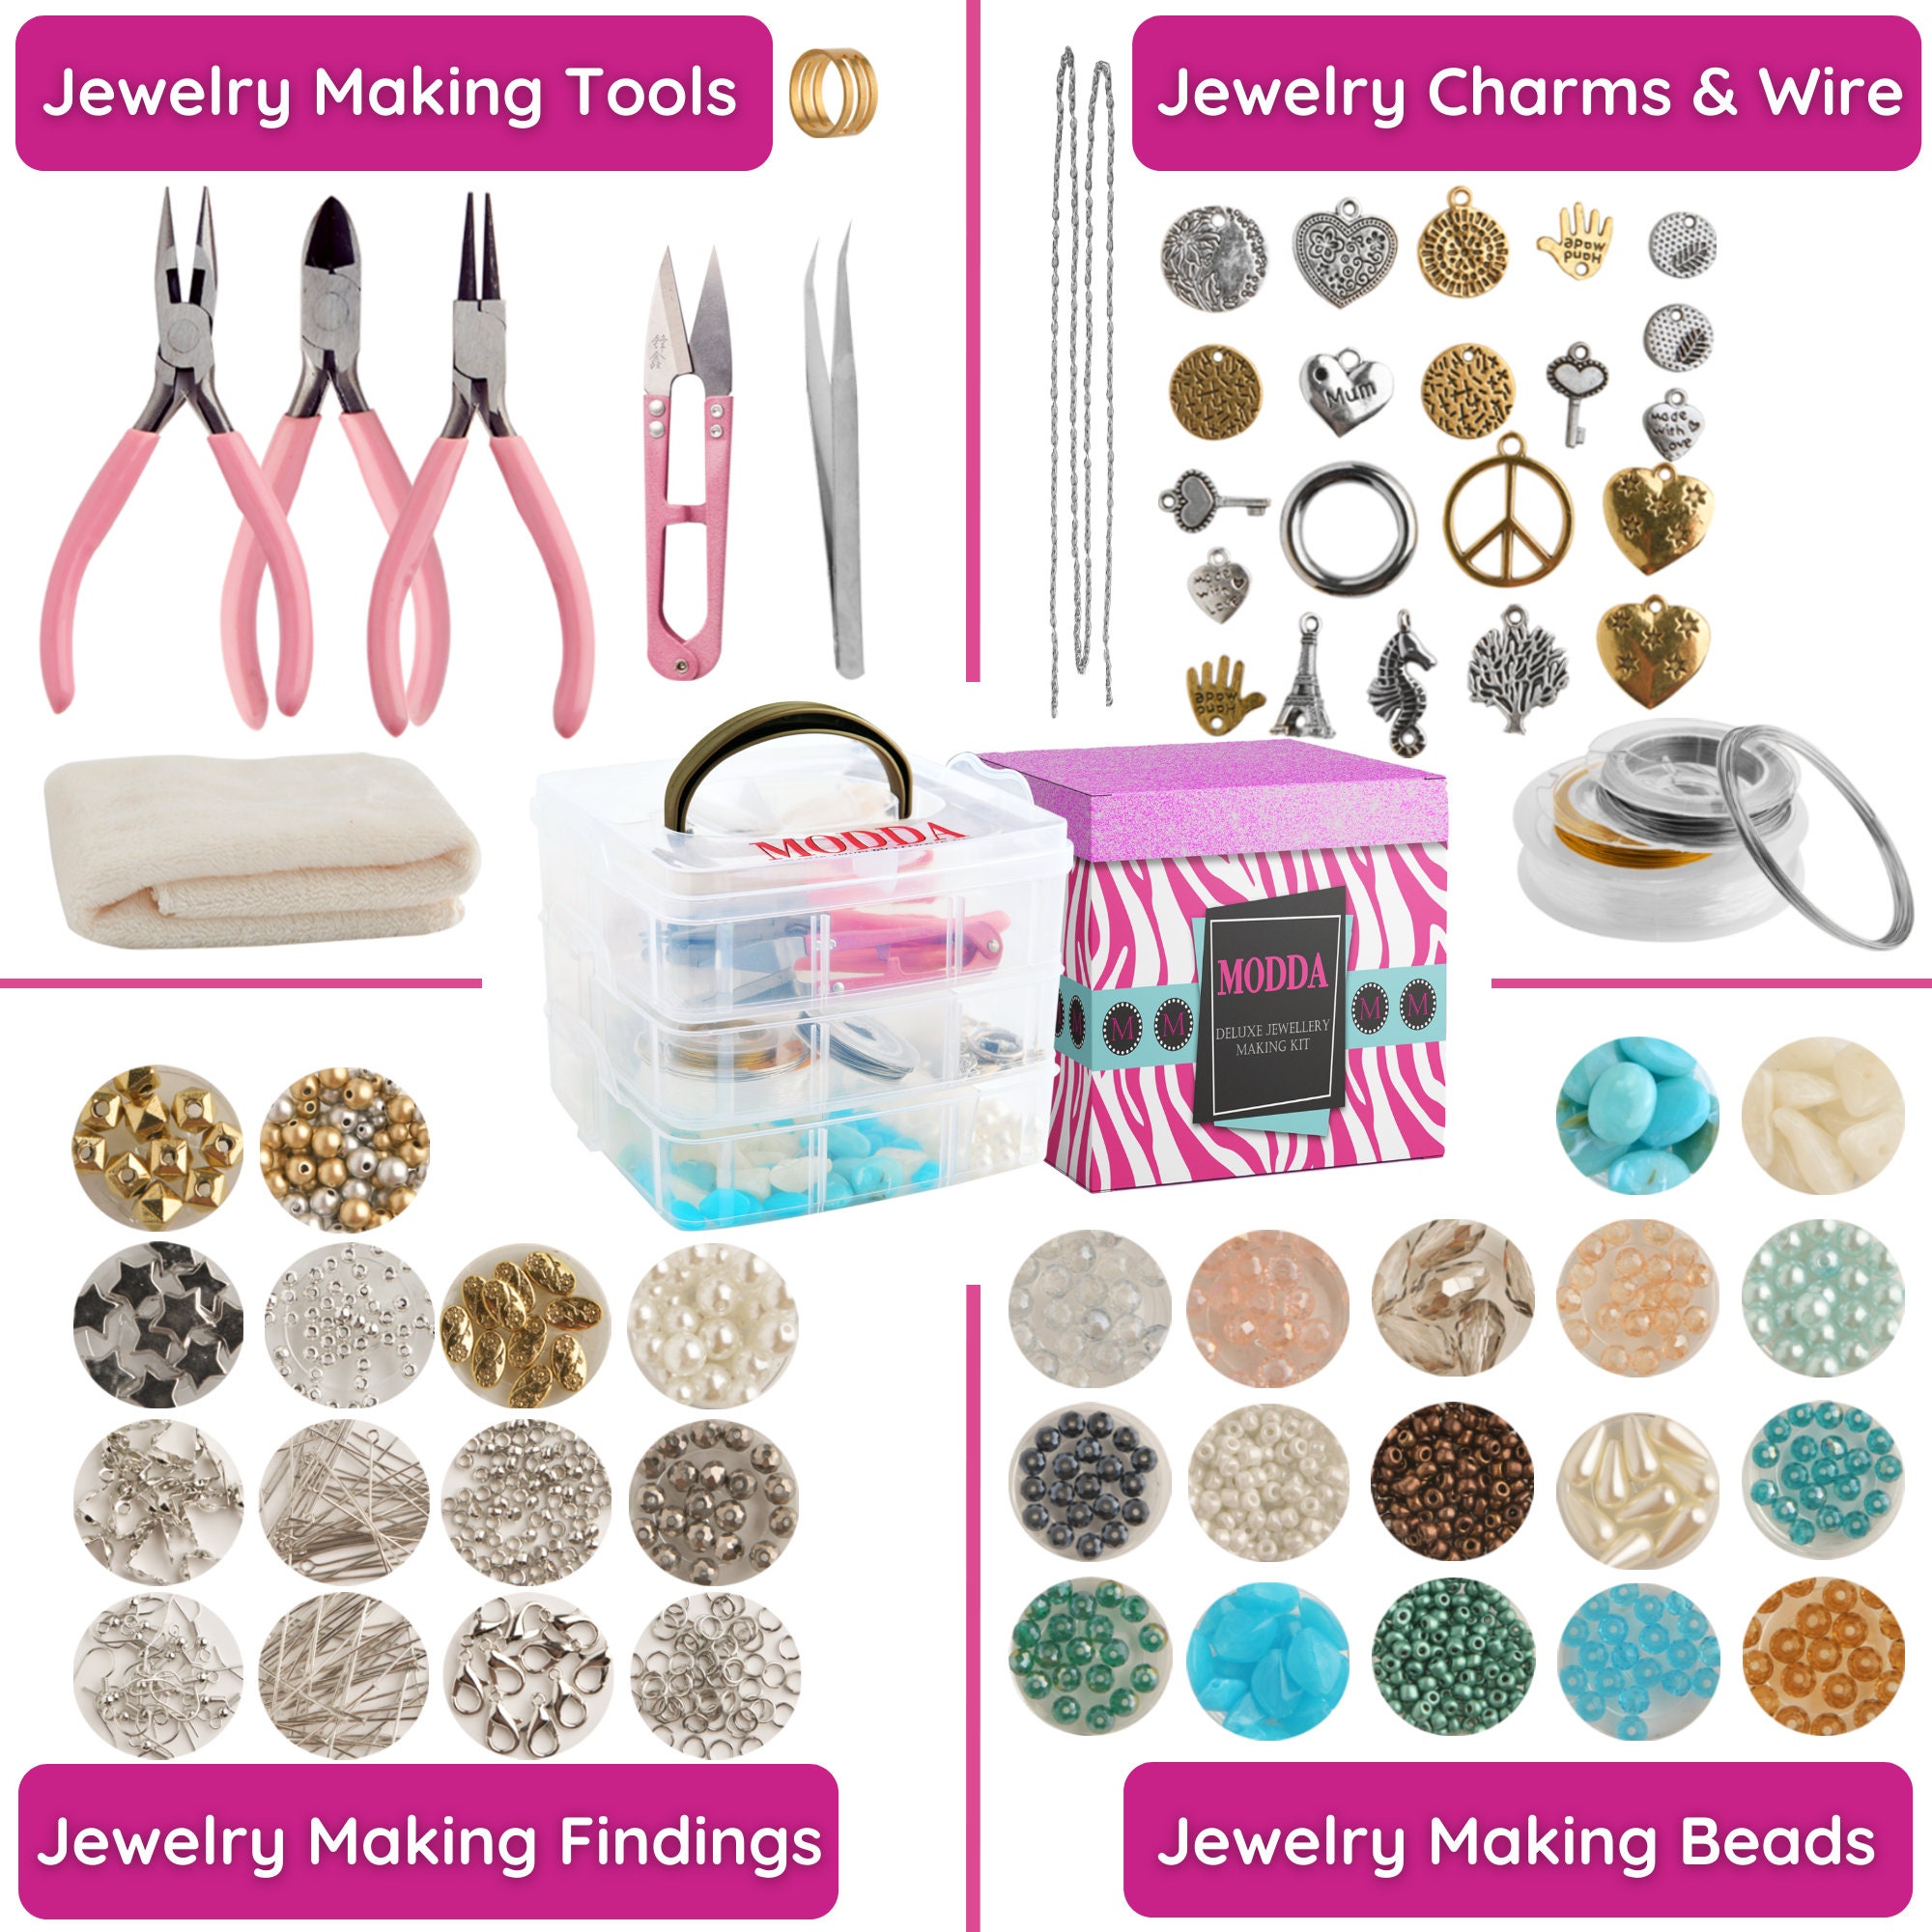 5 American-Made Jewelry Tools We Love